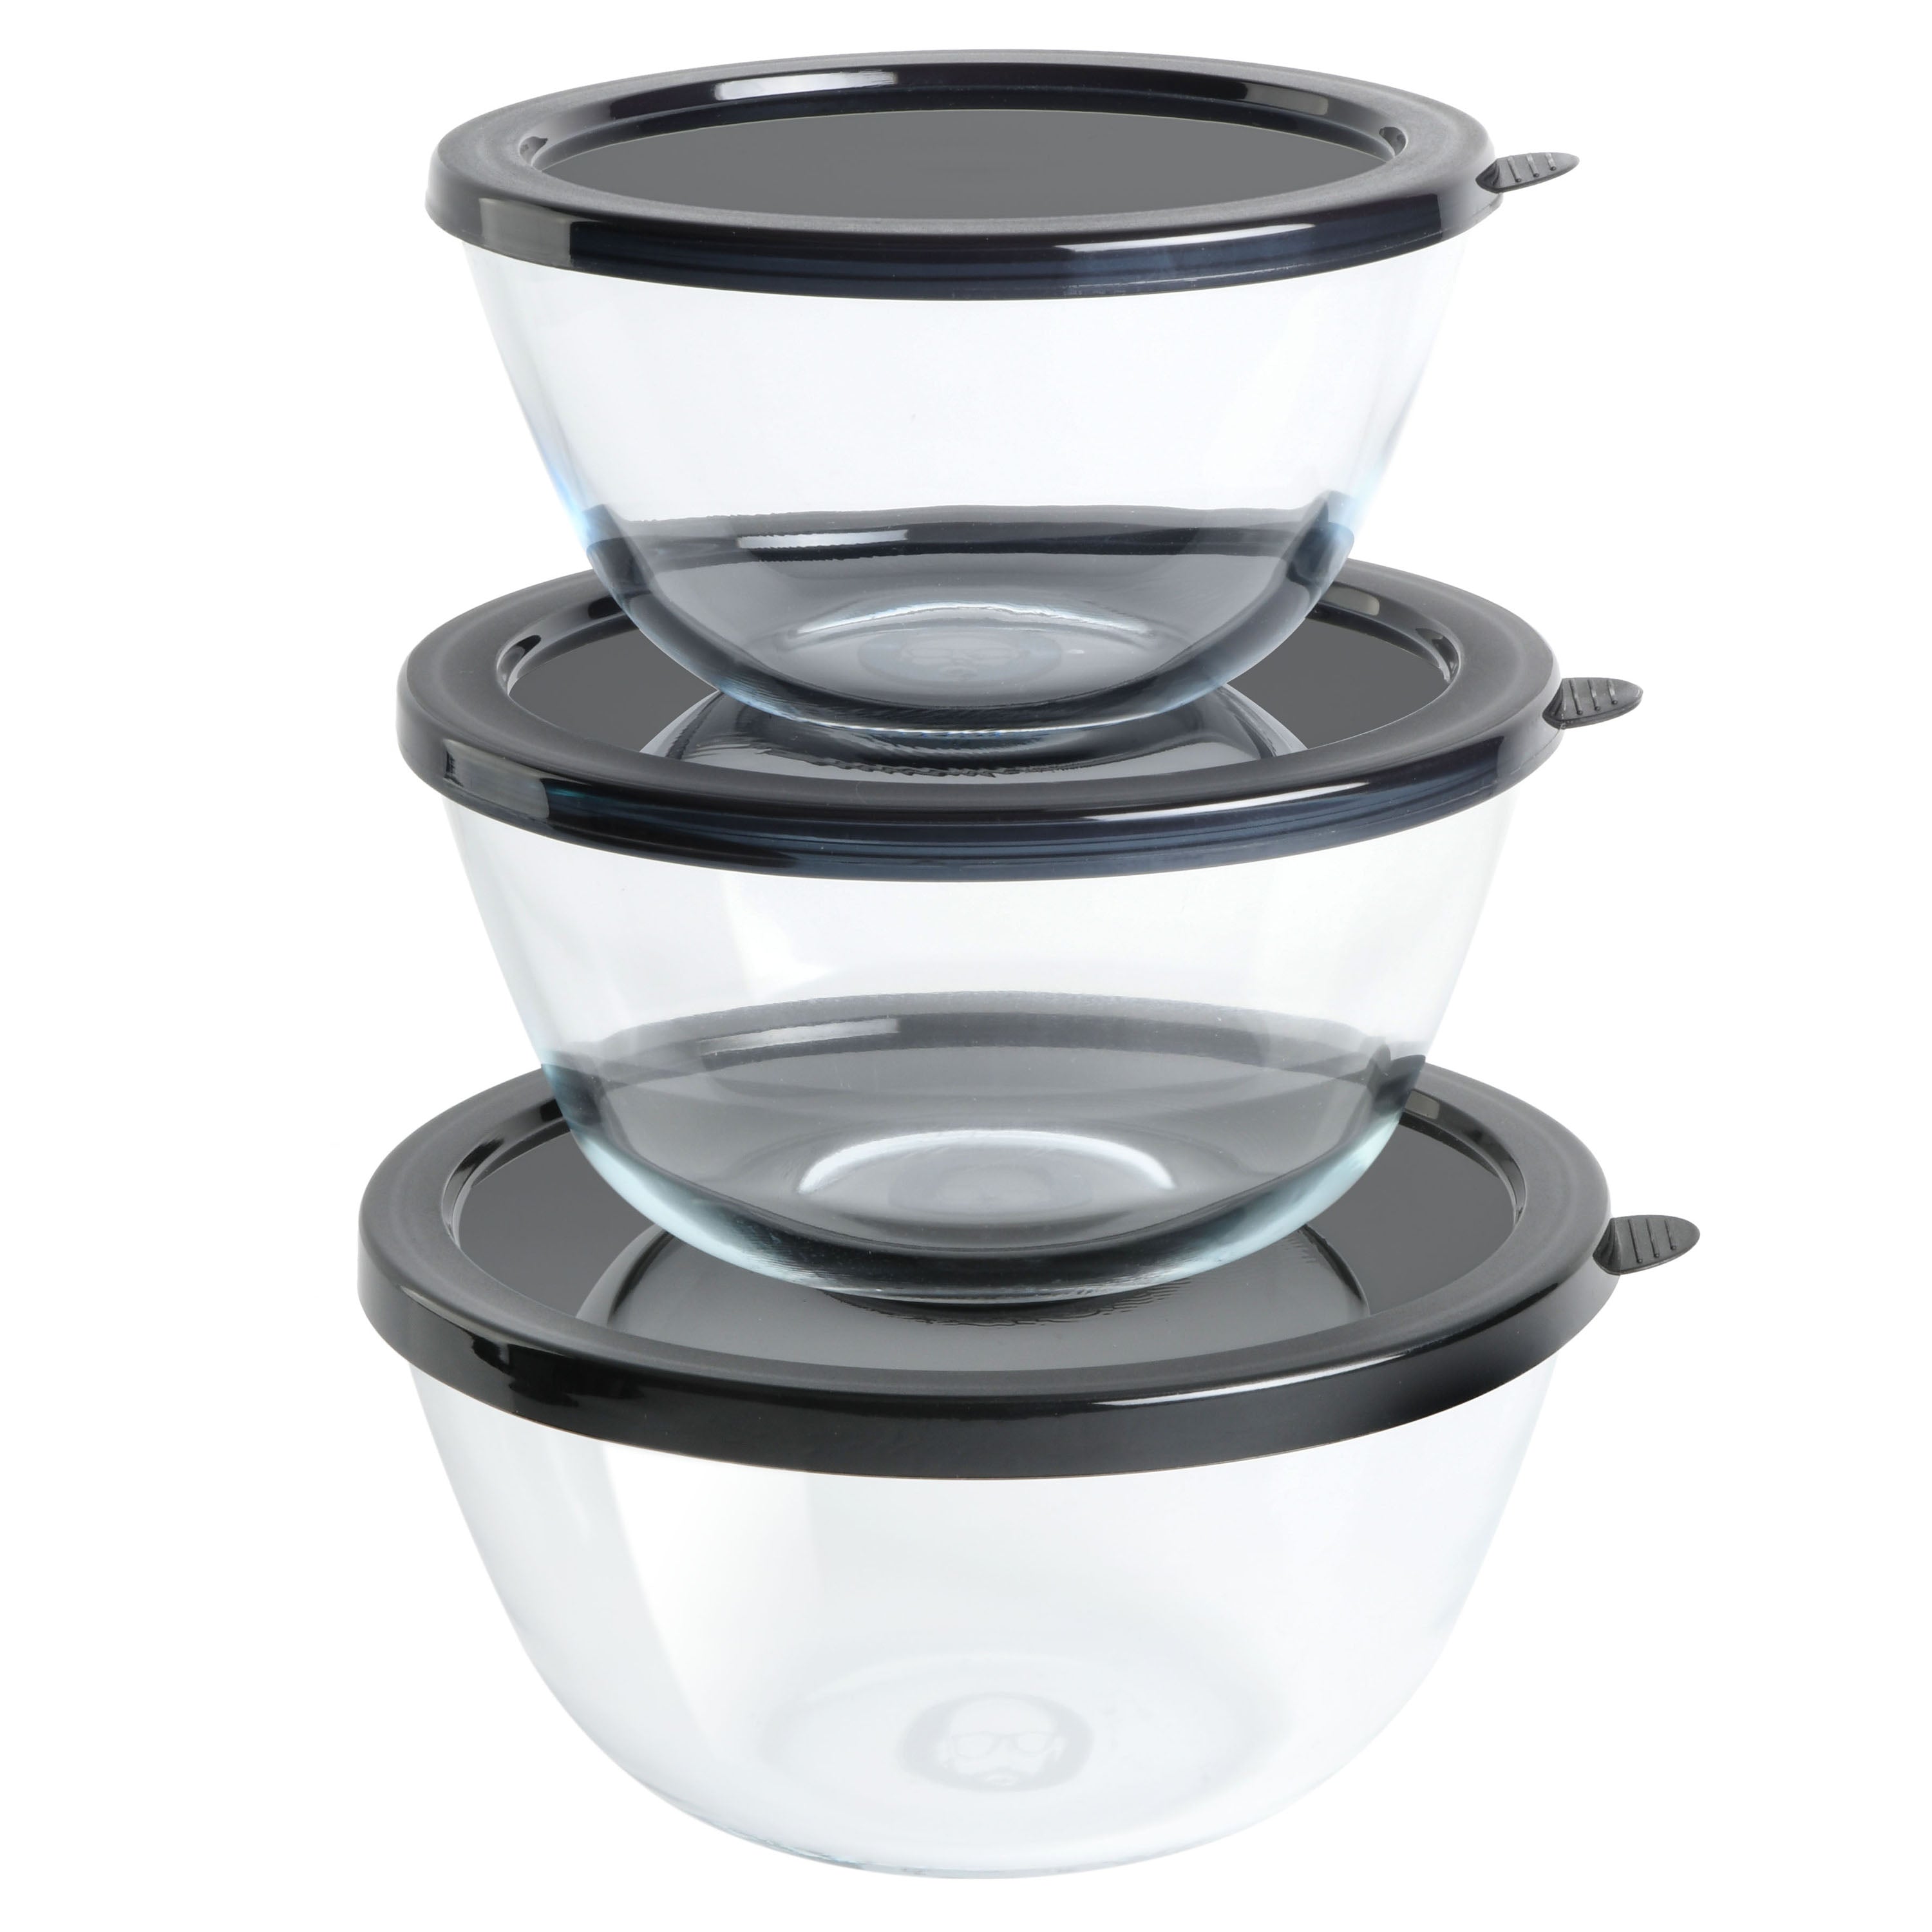 Cuisinart Stainless Steel Mixing Bowls With Lids, Set of 3 - Spoons N Spice